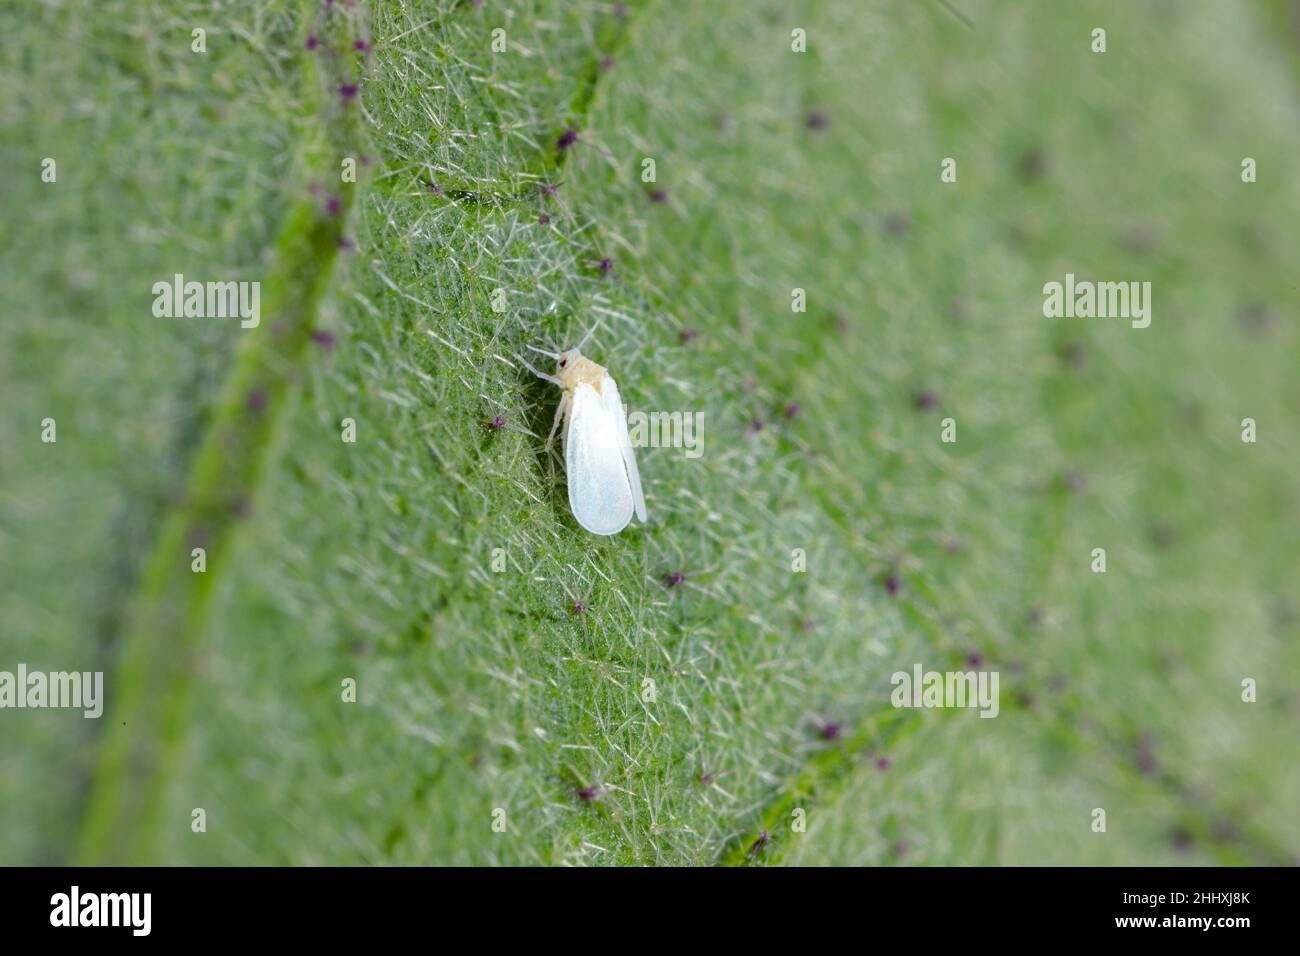 The glasshouse whitefly or greenhouse whitefly - Trialeurodes vaporariorum. It is important pest of many plants. Stock Photo